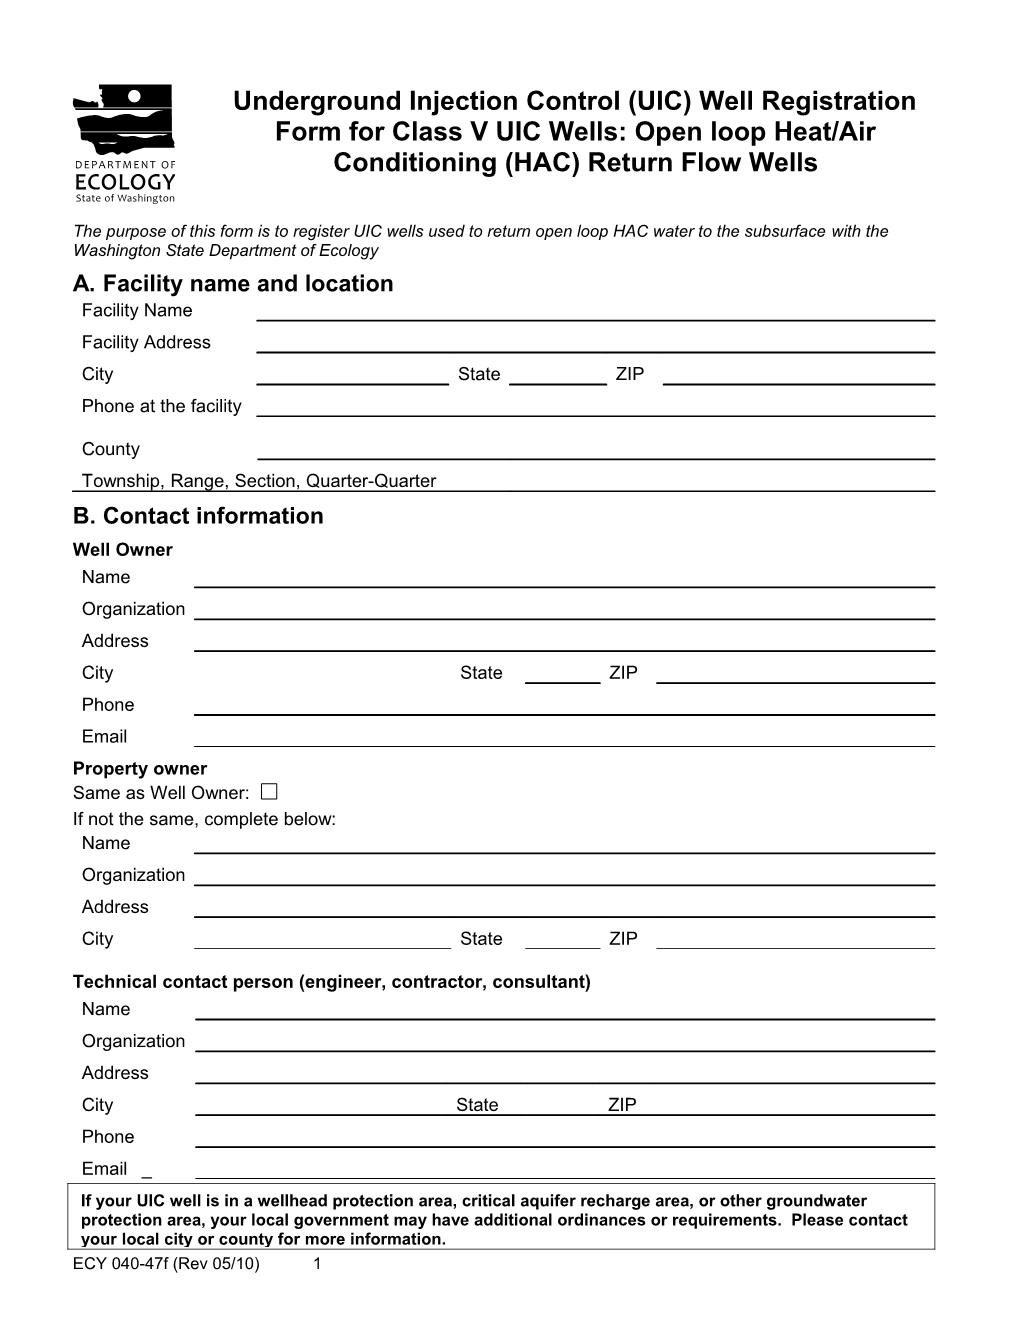 Underground Injection Control (UIC) Well Registration Form for Class V UIC Wells: Open